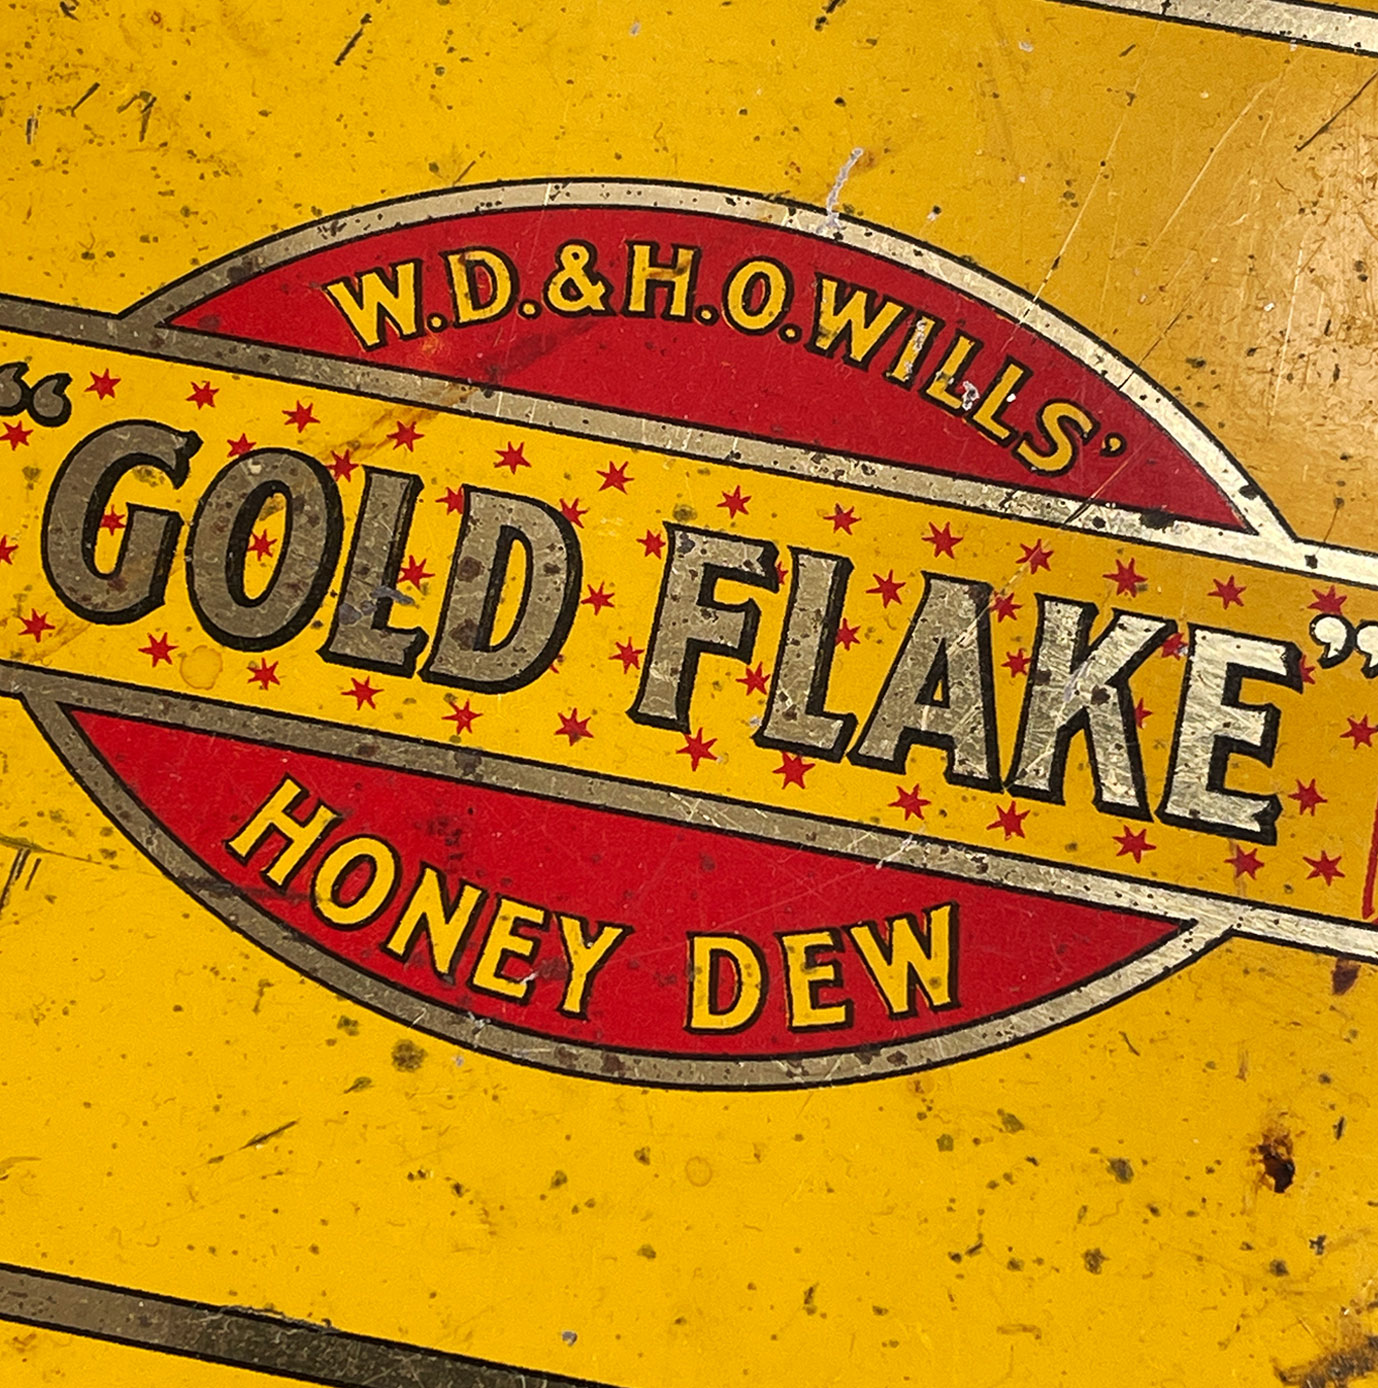 A Vintage Gold Flake Honey Dew Tobacco Tin from W.D & H.O Wills. Great colourful graphics to the front and sides with further typography to the inside lid. - SHOP NOW - www.intovintage.co.uk